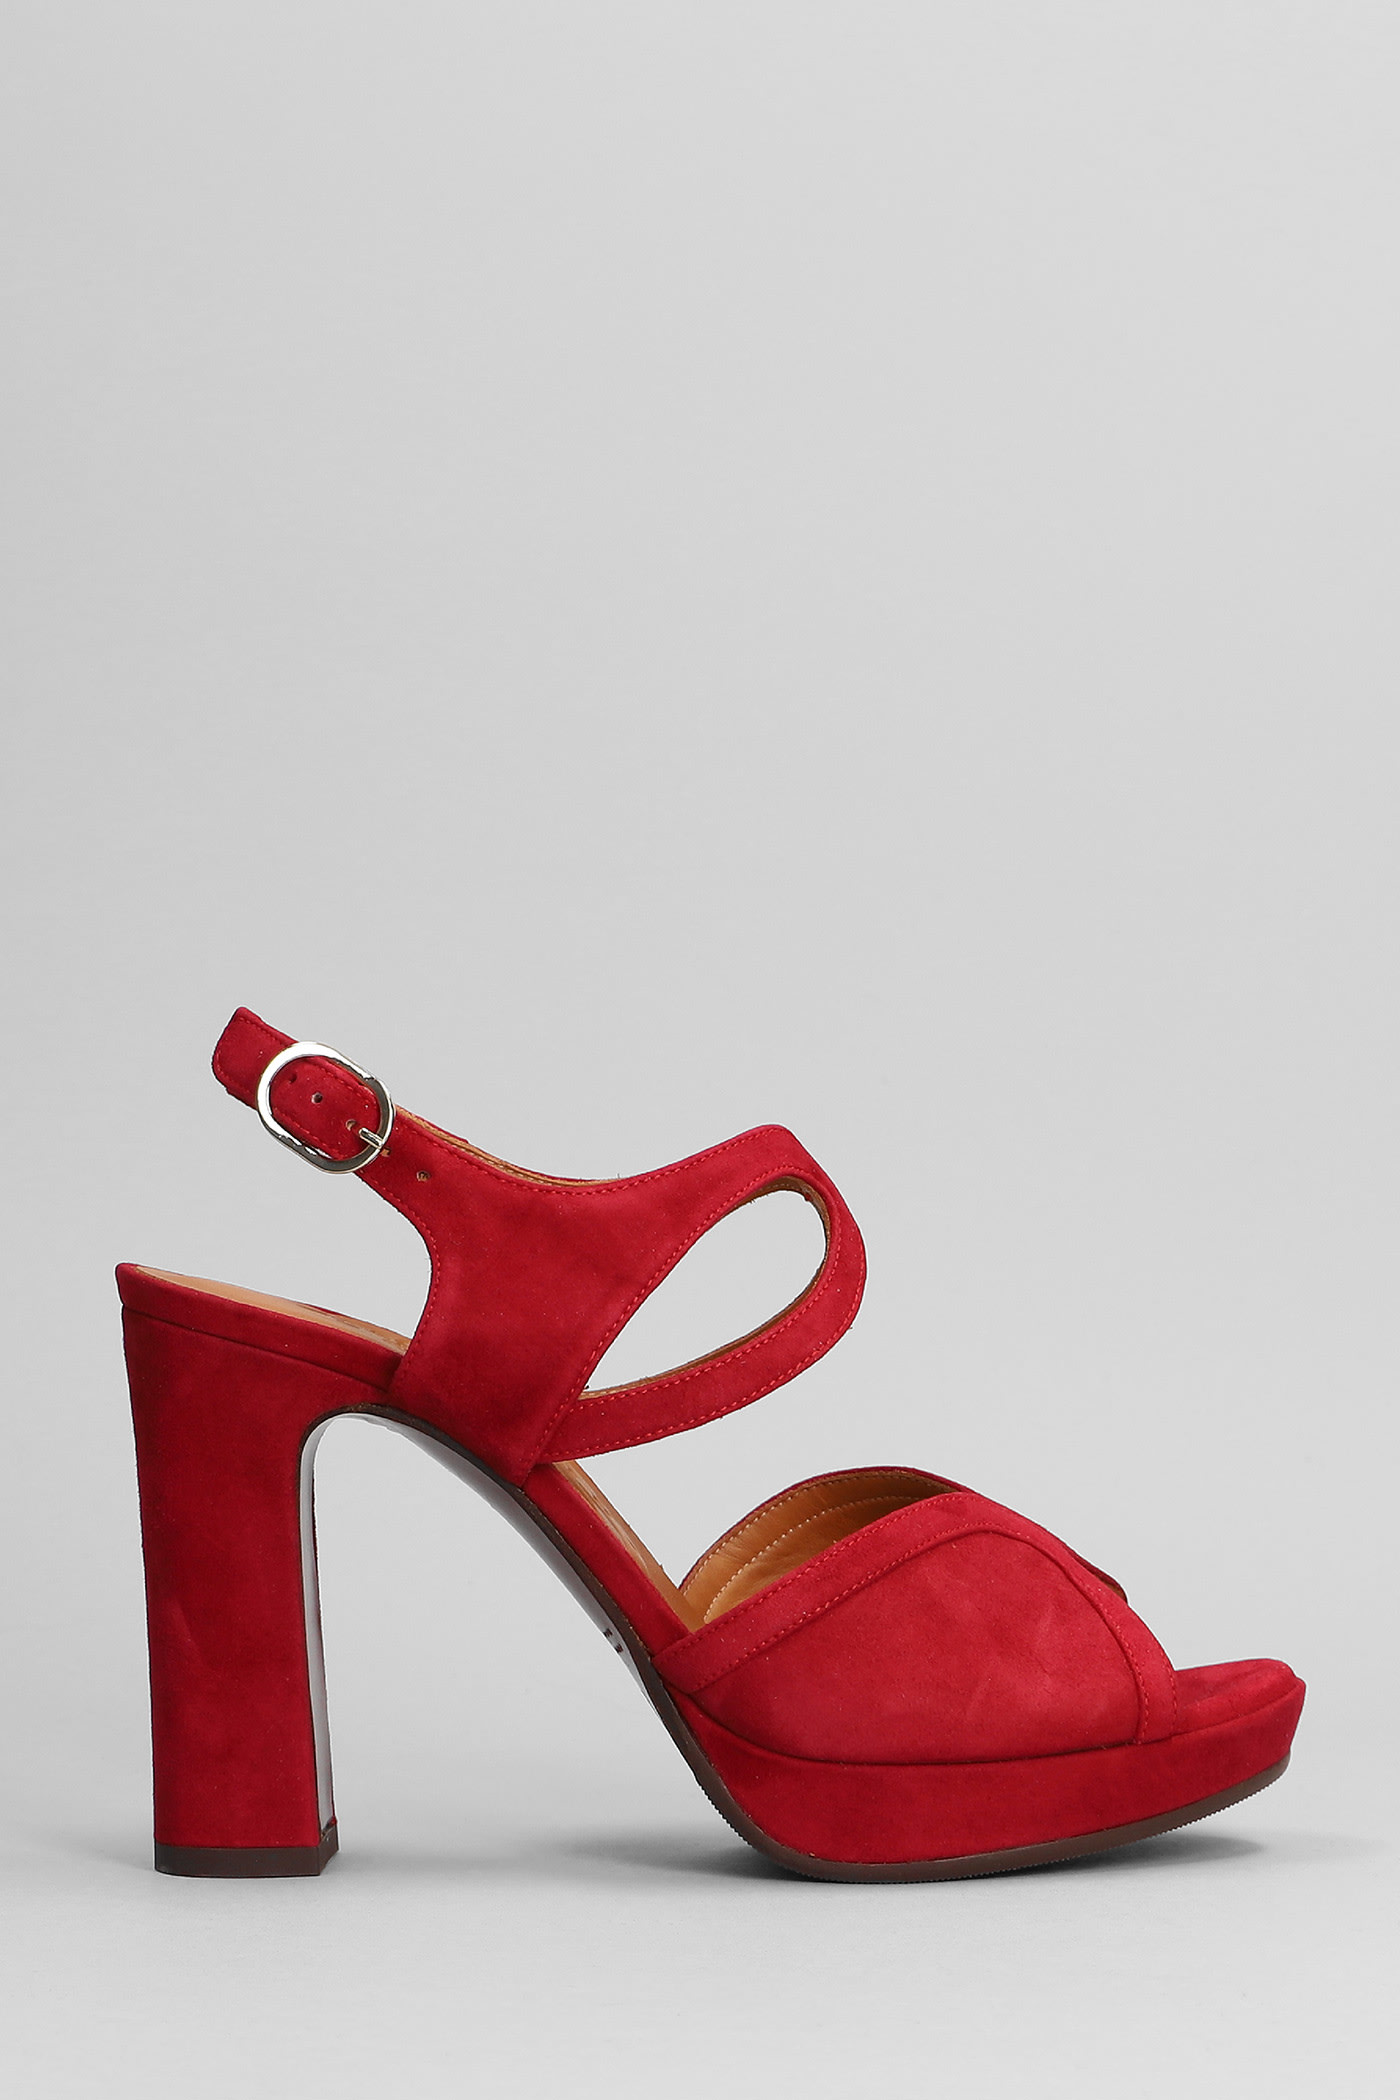 Chie Mihara Caisa Sandals In Red Suede